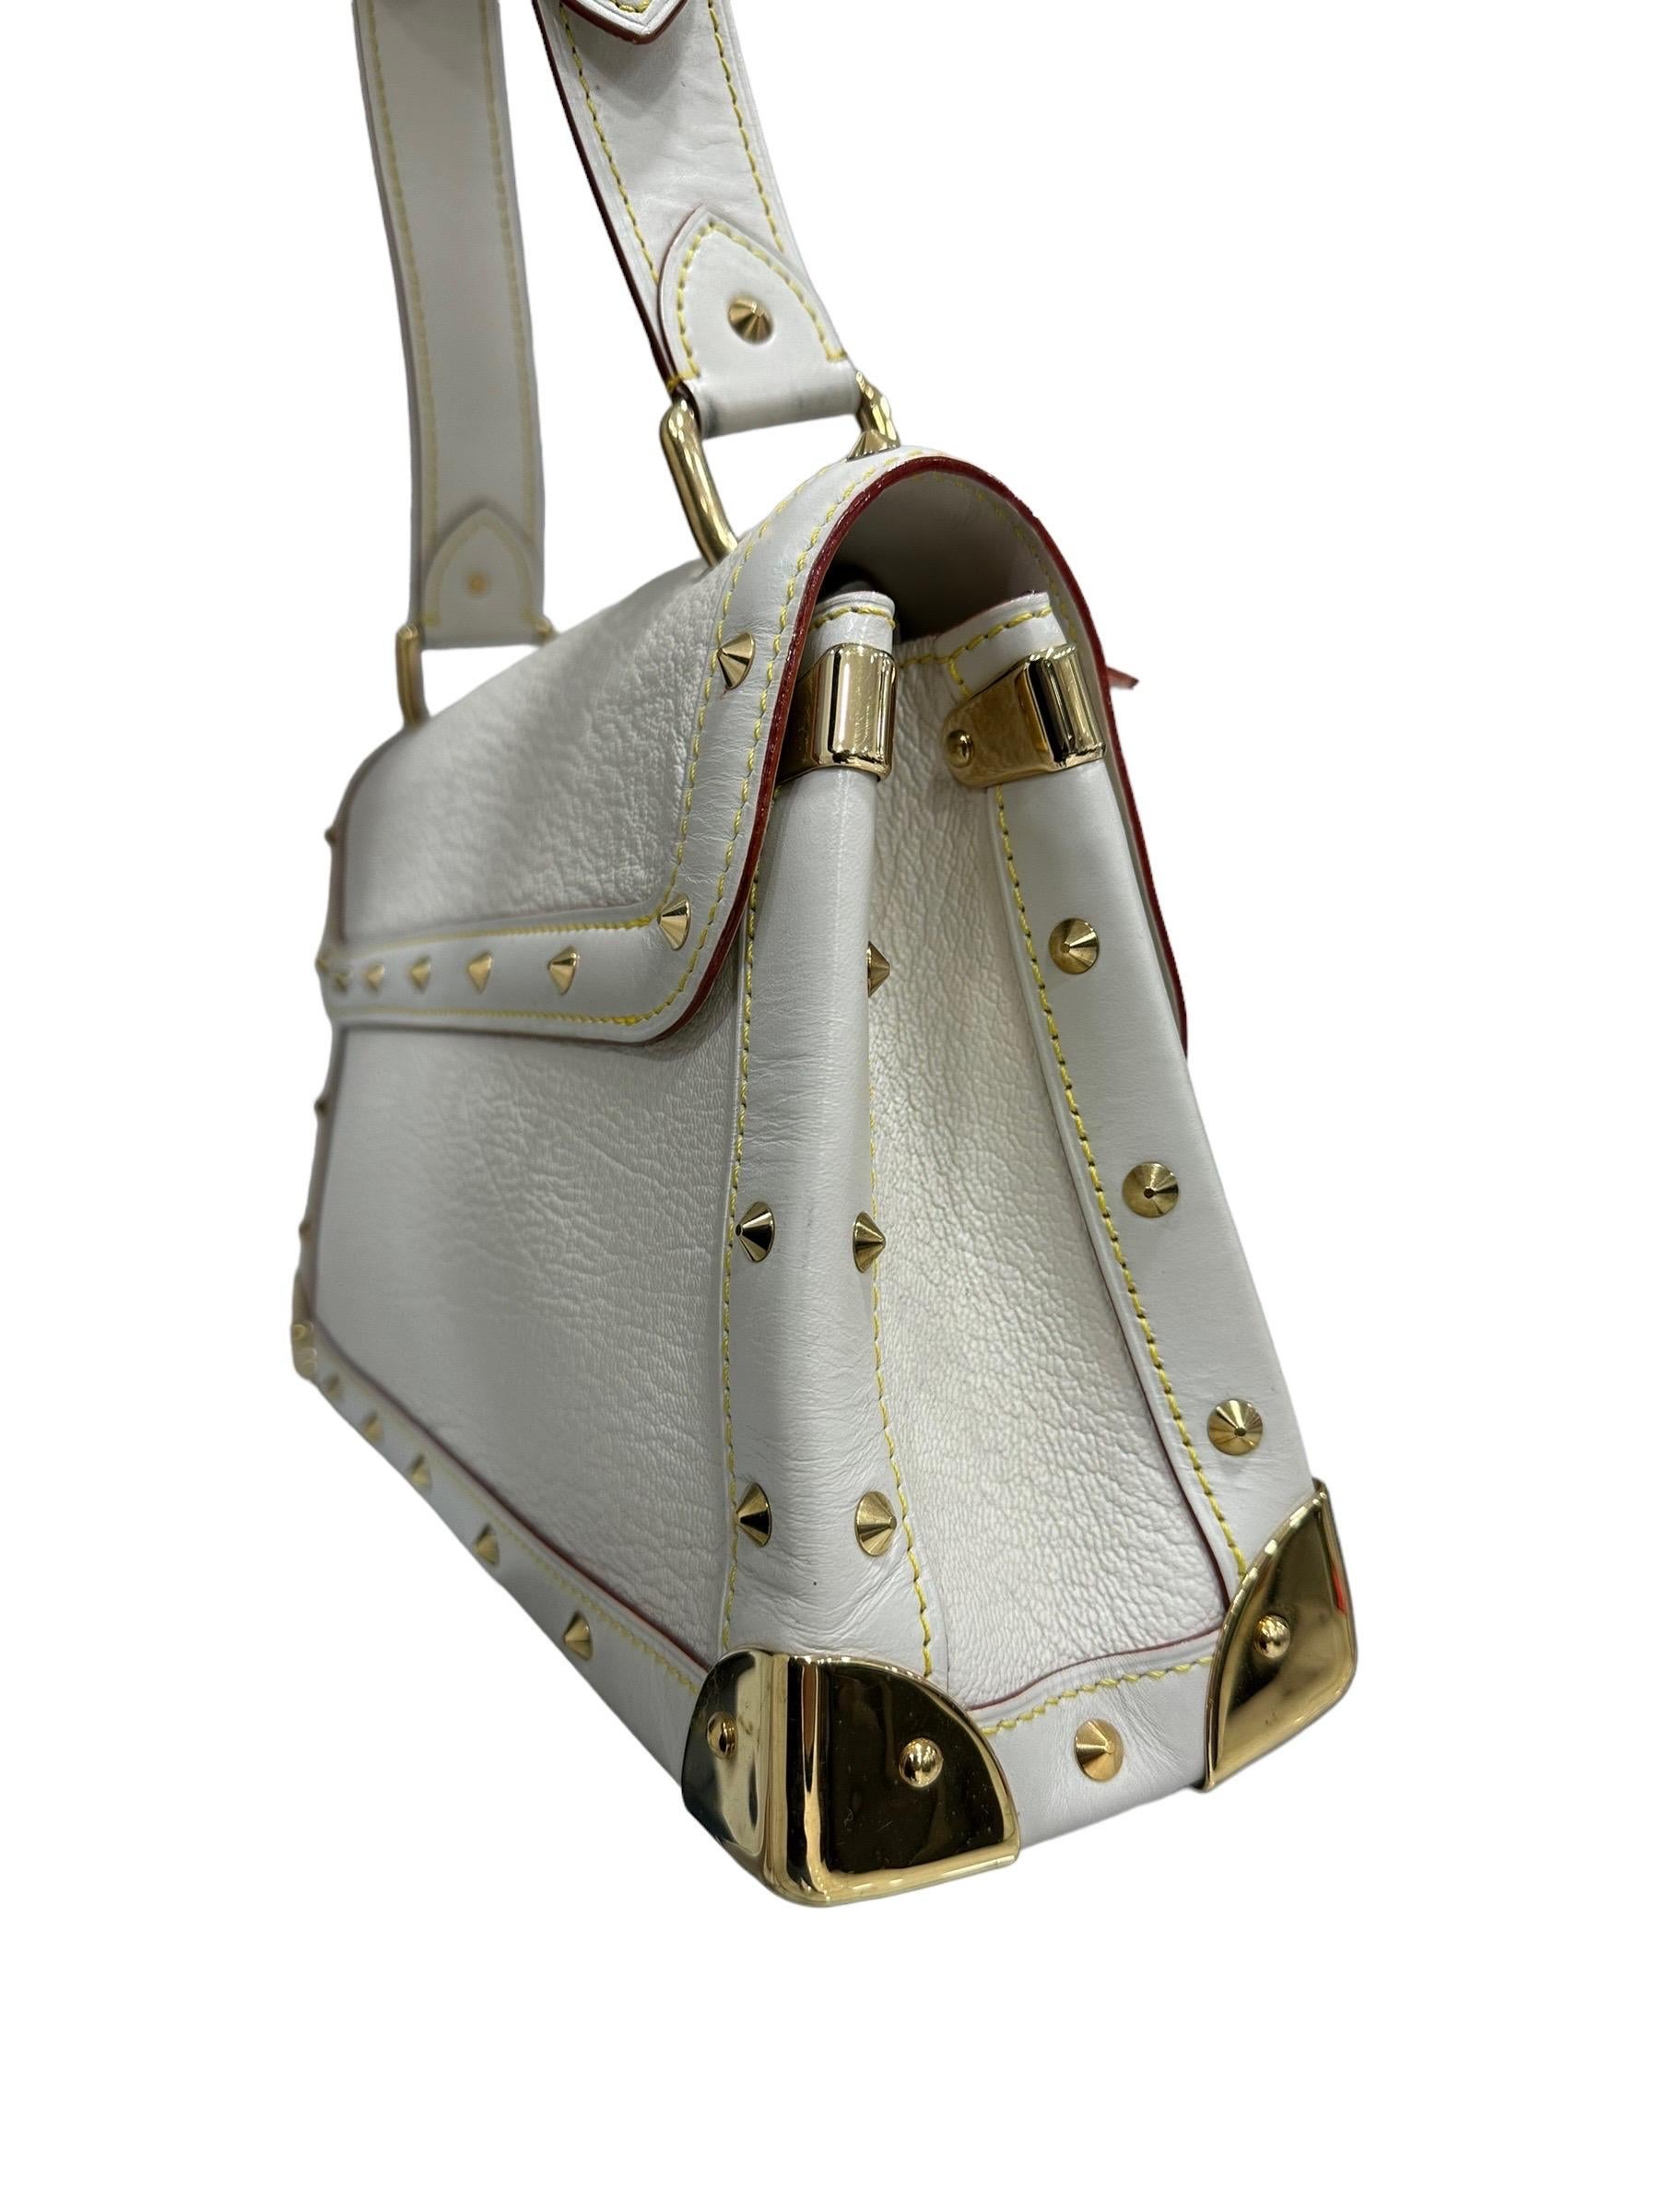 Louis Vuitton bag, Le Talentueux model, made in cream colored Suhali leather with gold hardware. Featuring a front flap closure and snap button closure. Equipped with an adjustable leather handle for easy hand carrying. Enriched with studs along the